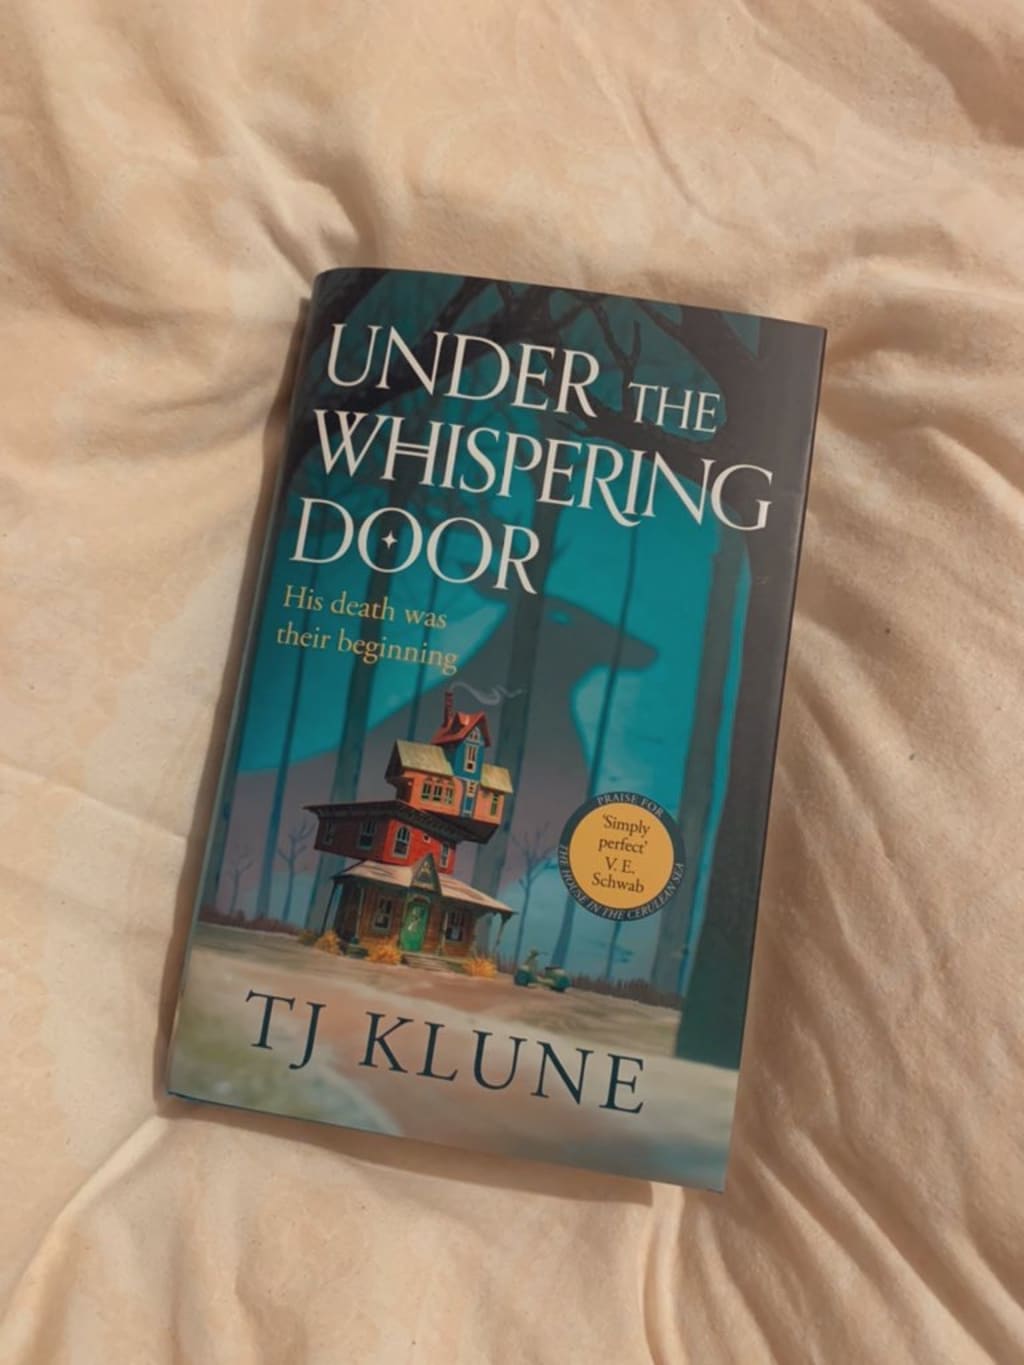 Book Review: Under the Whispering Door by T.J Klune